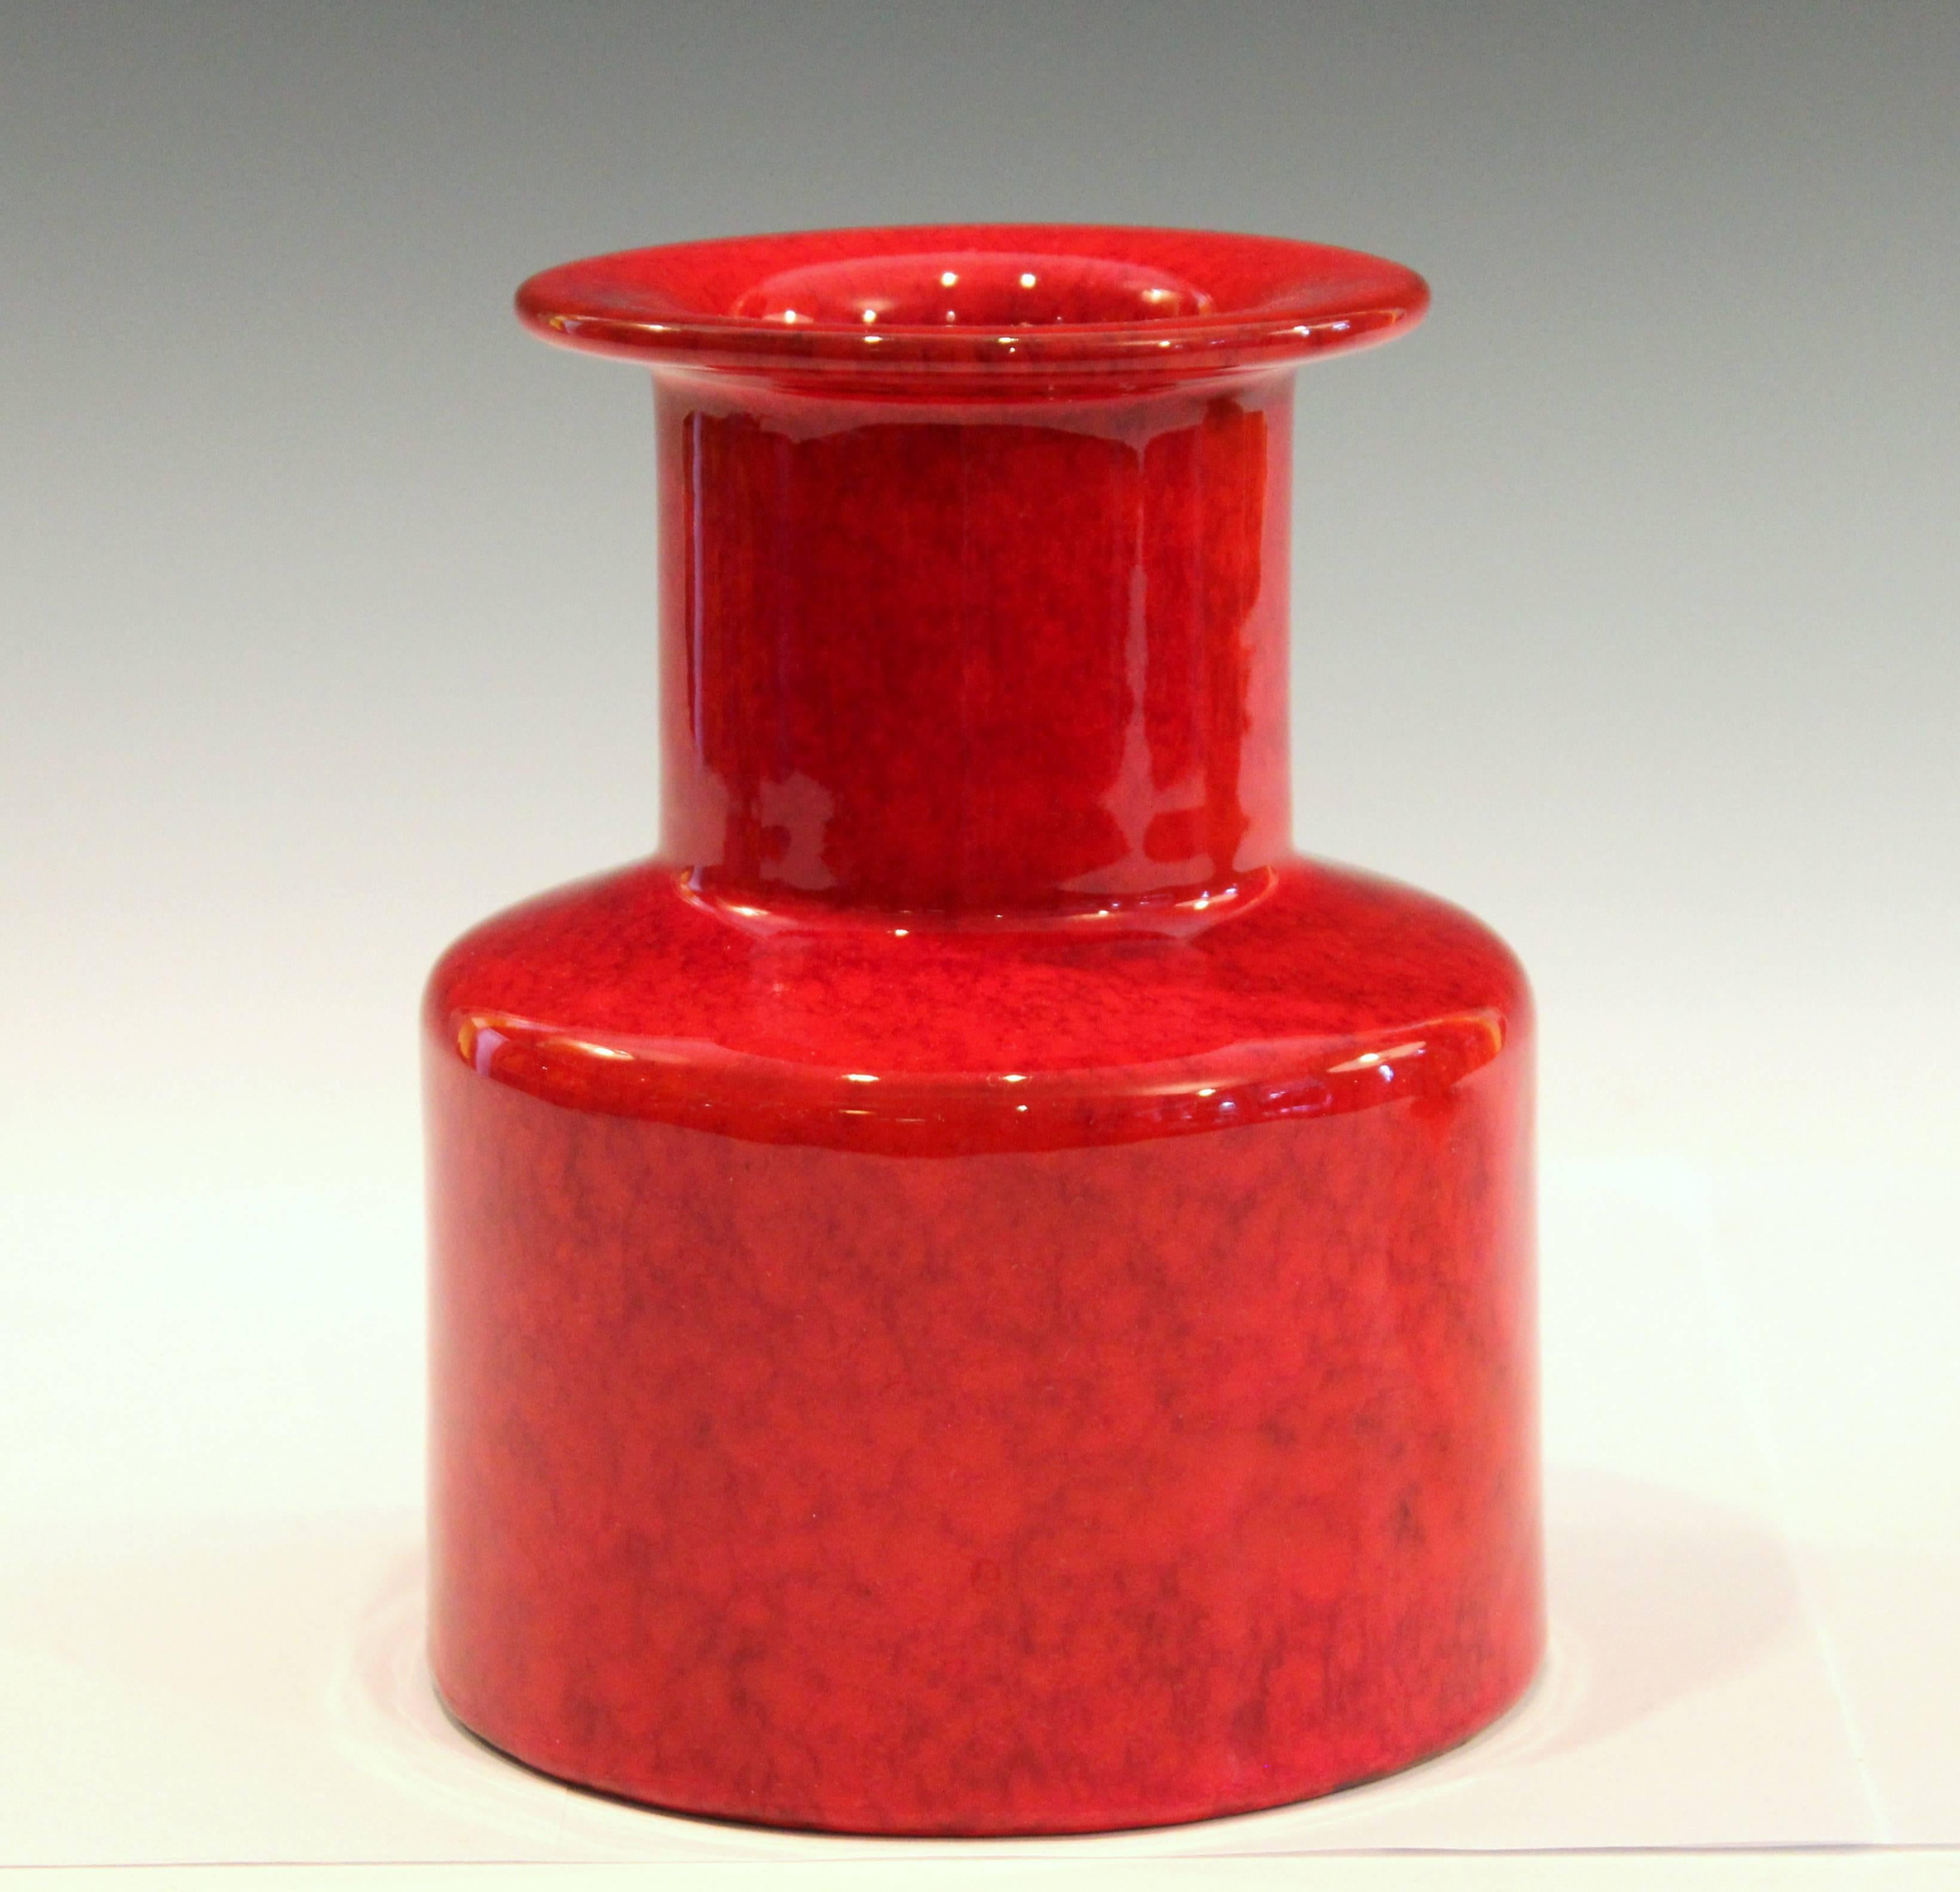 Vintage Italian pottery Rouleau form vase in mottled atomic red glaze, circa 1960s. Attributed to Italica Ars. Measures: 6